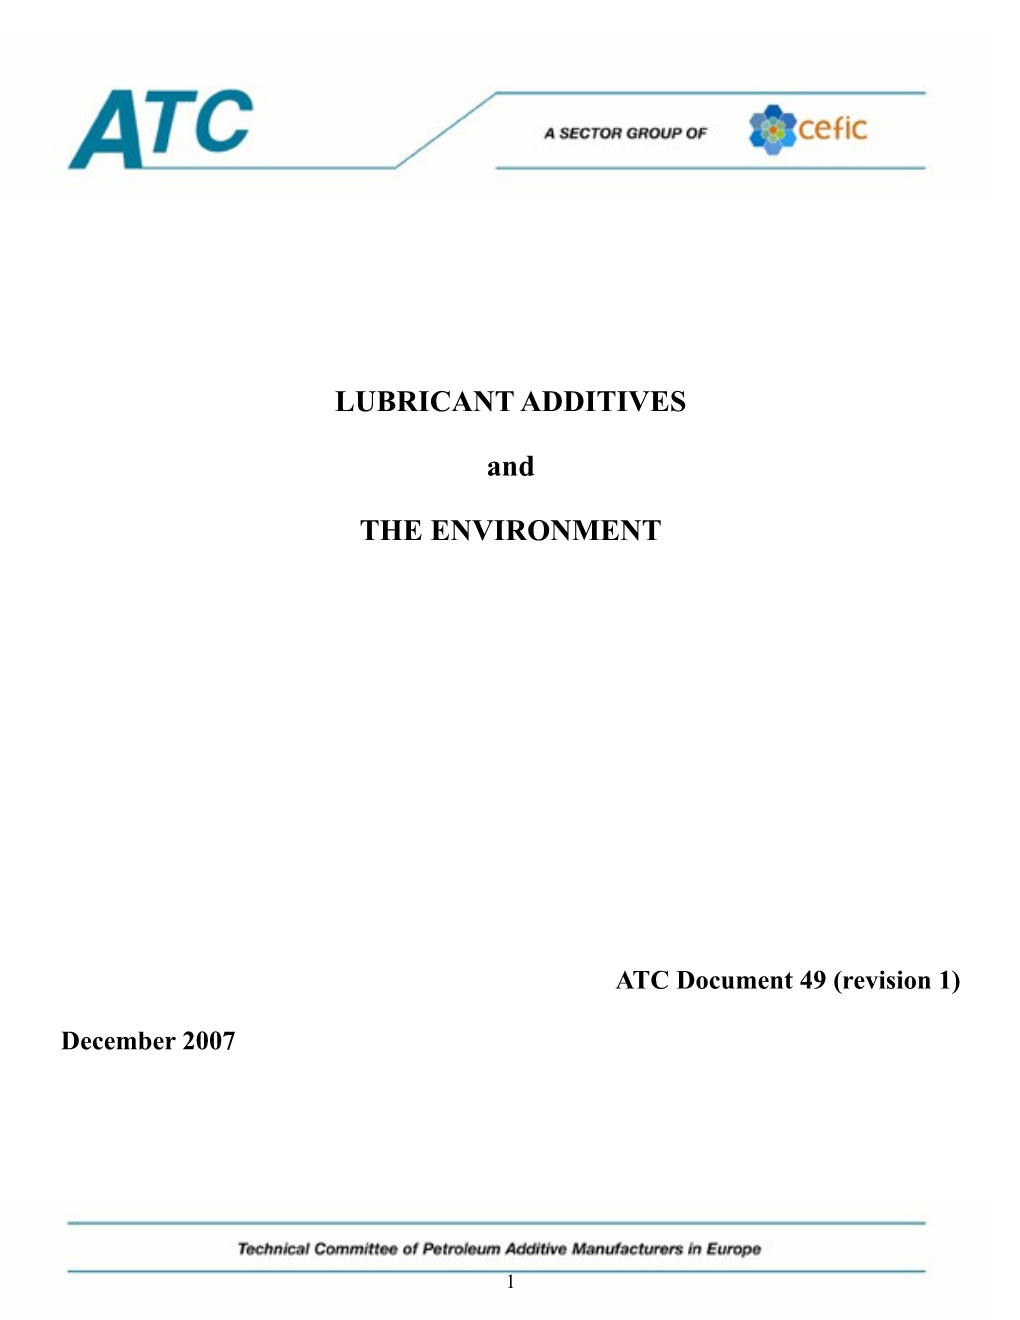 Lubricant Additives and the Environment